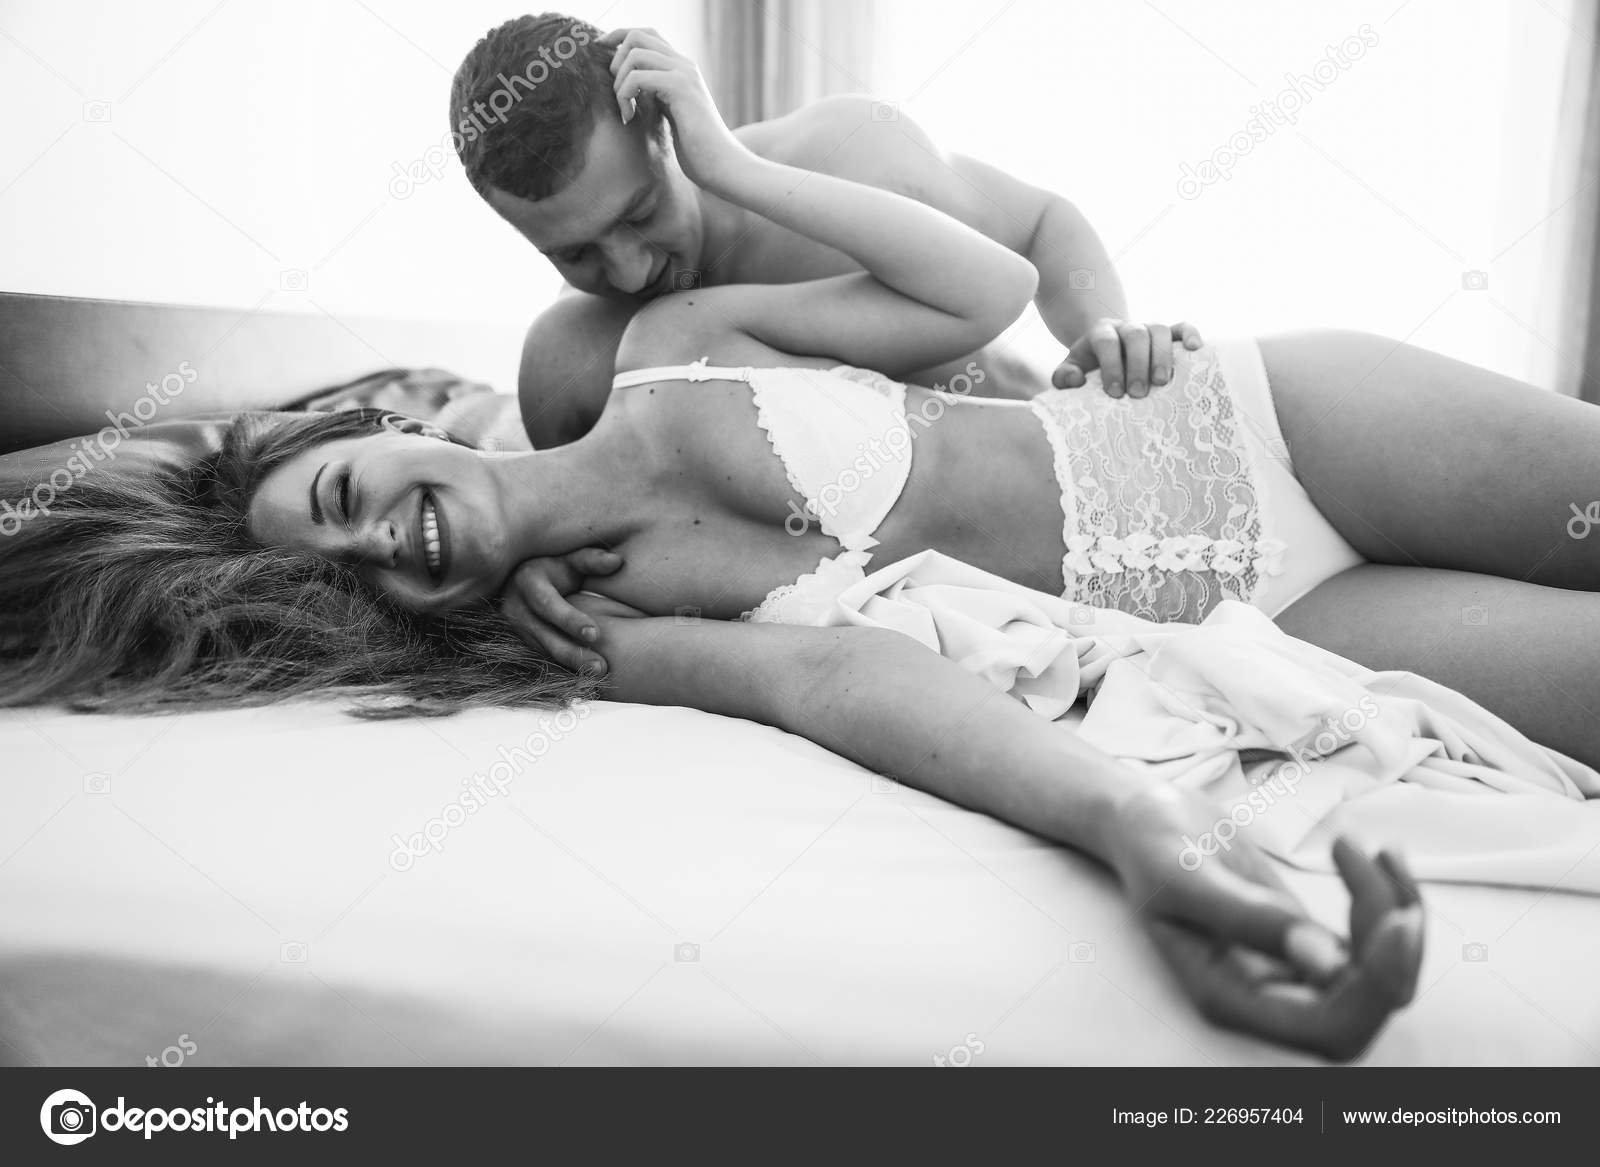 Black and white sex couple